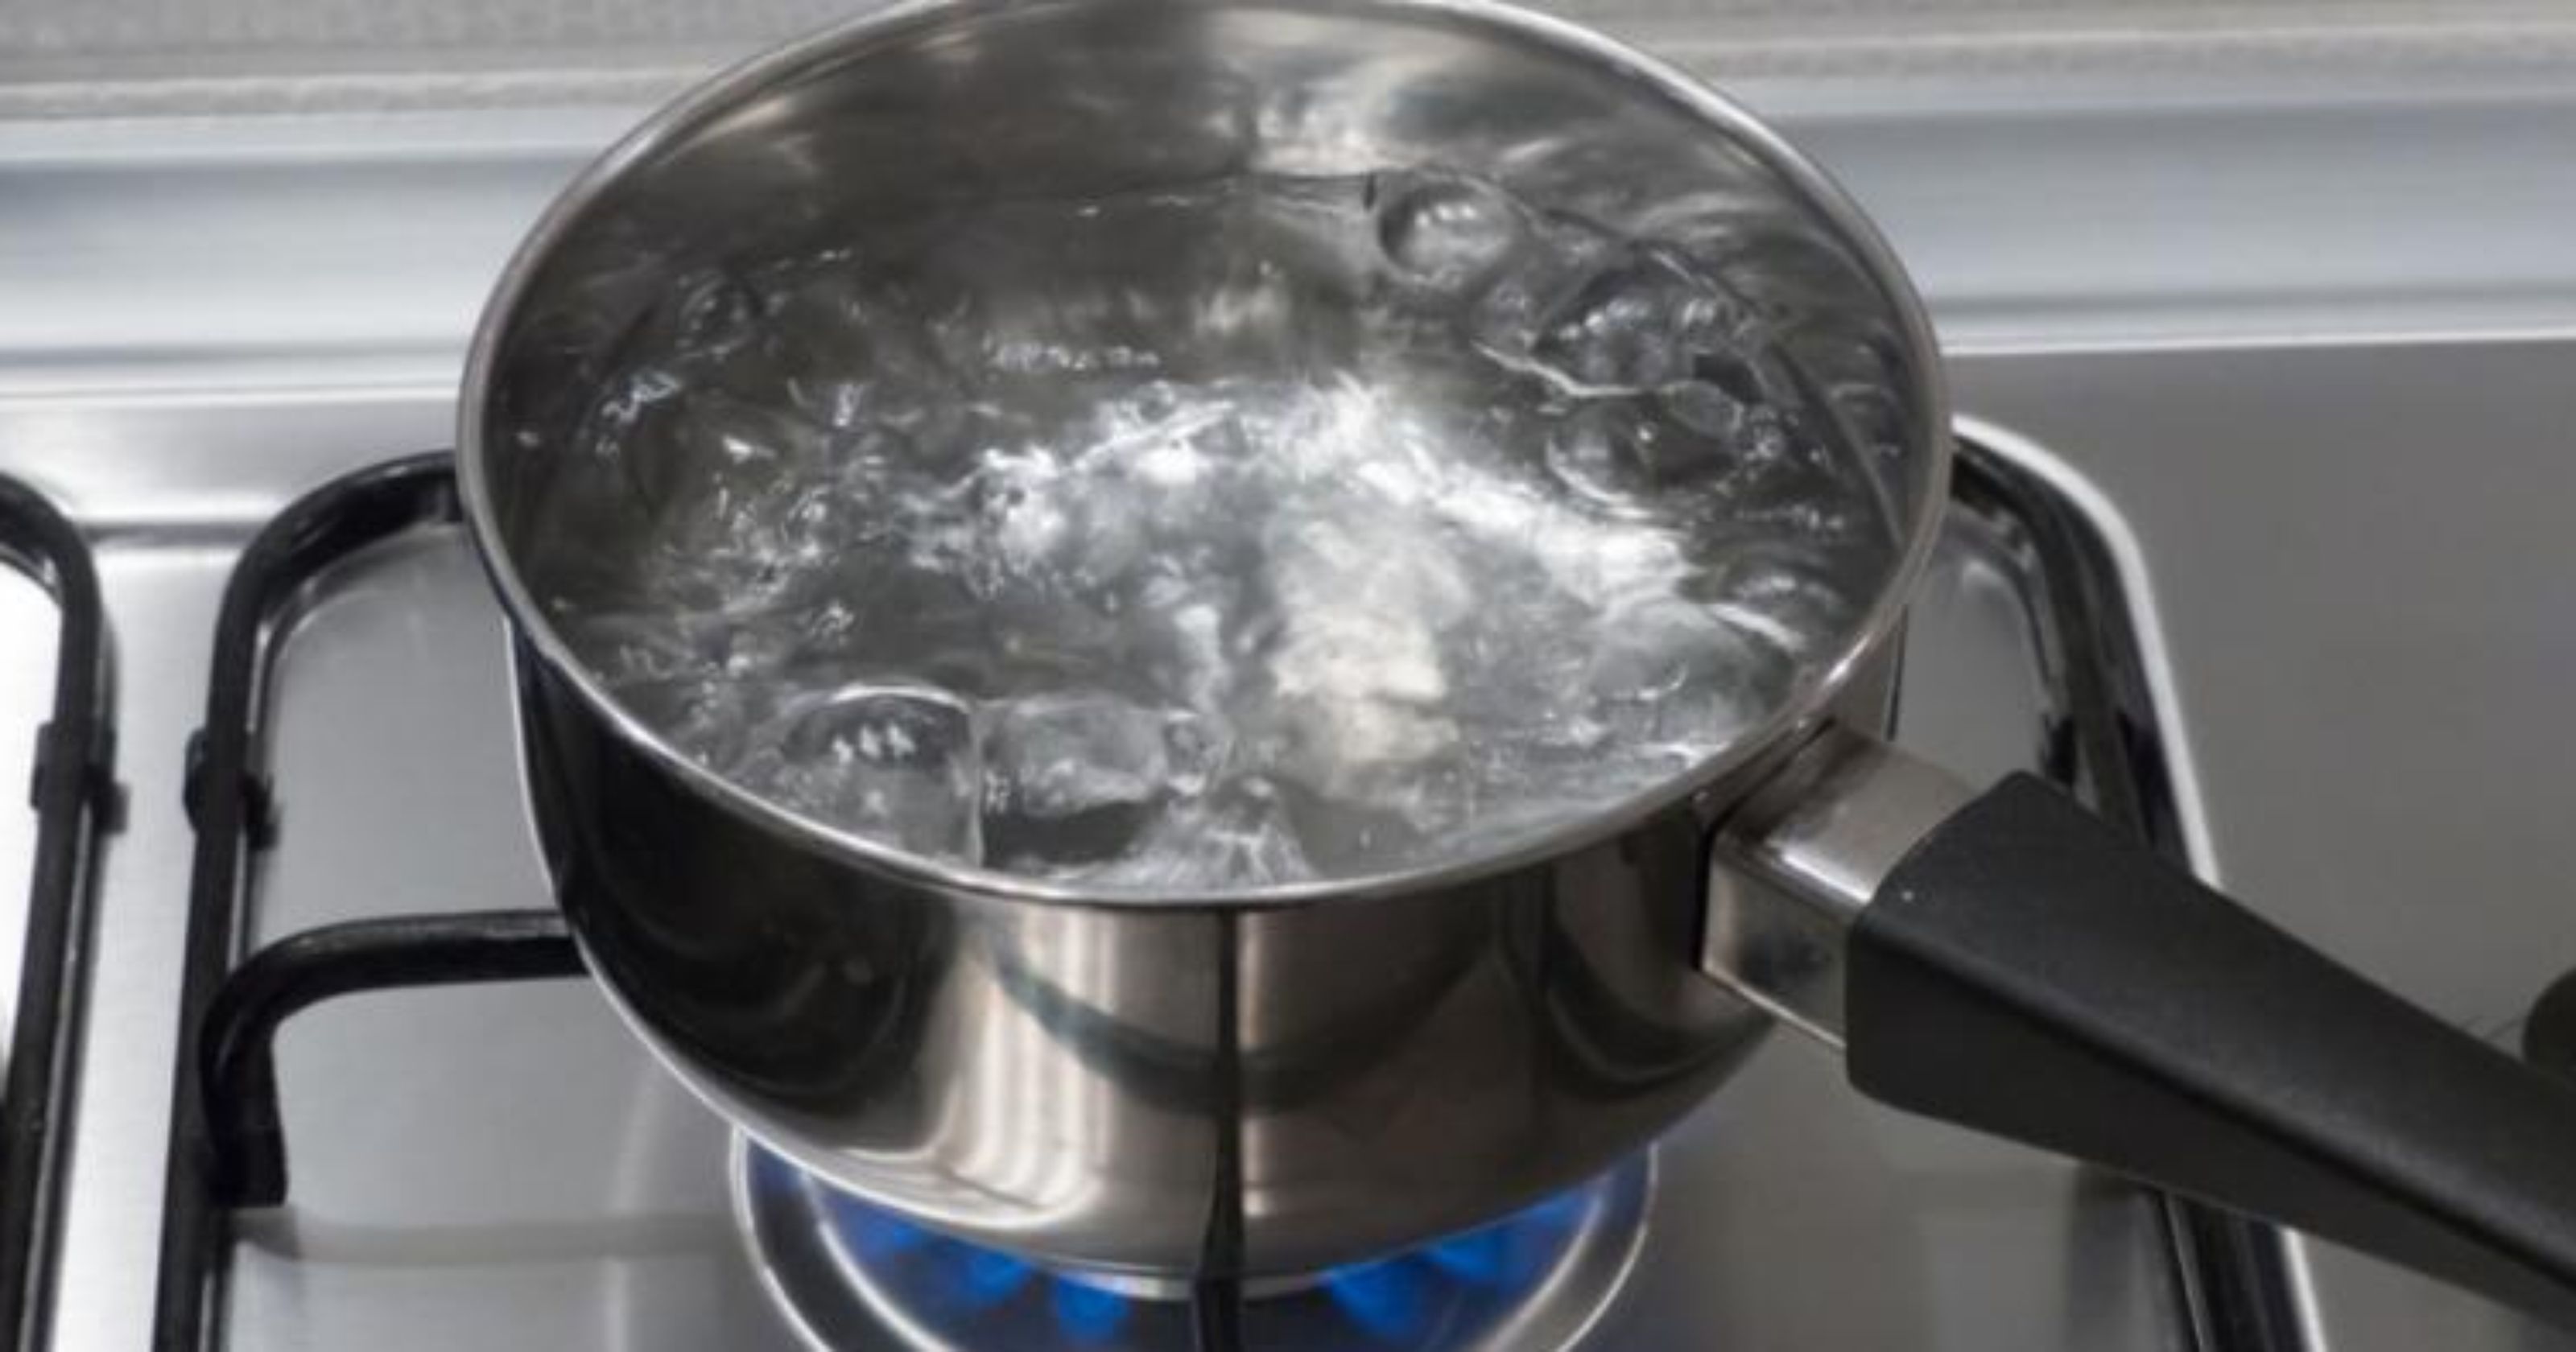 Boil water advisory lifted in Livonia